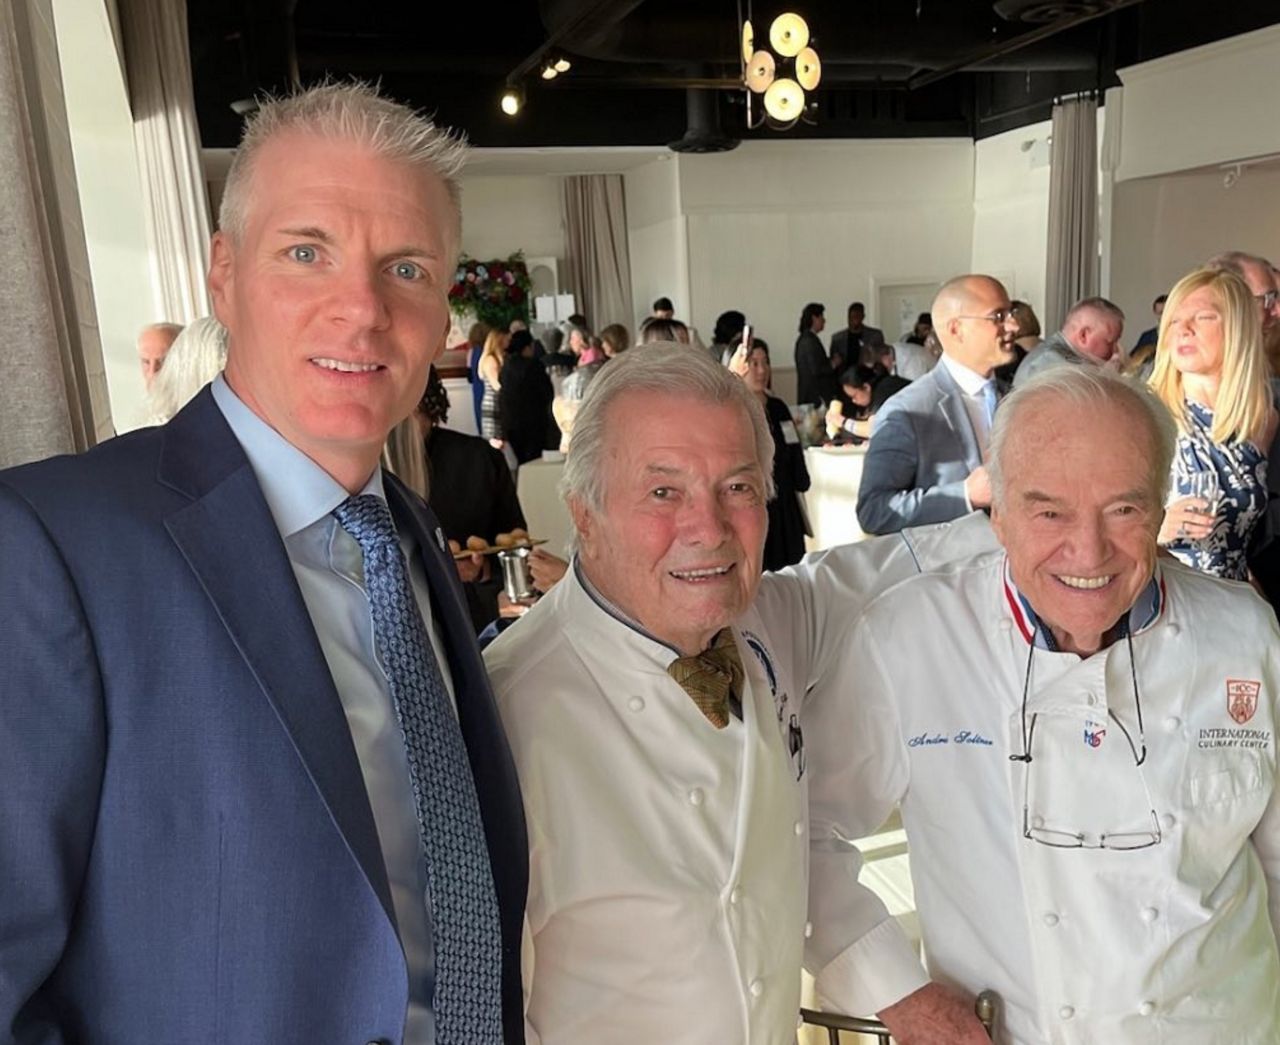 Chef Brandon Chrostowski recently served as keynote speaker for an event hosted by Jacques Pepin, a celebrated French chef. (Photo courtesy of Edwins Leadership and Restaurant Institute)